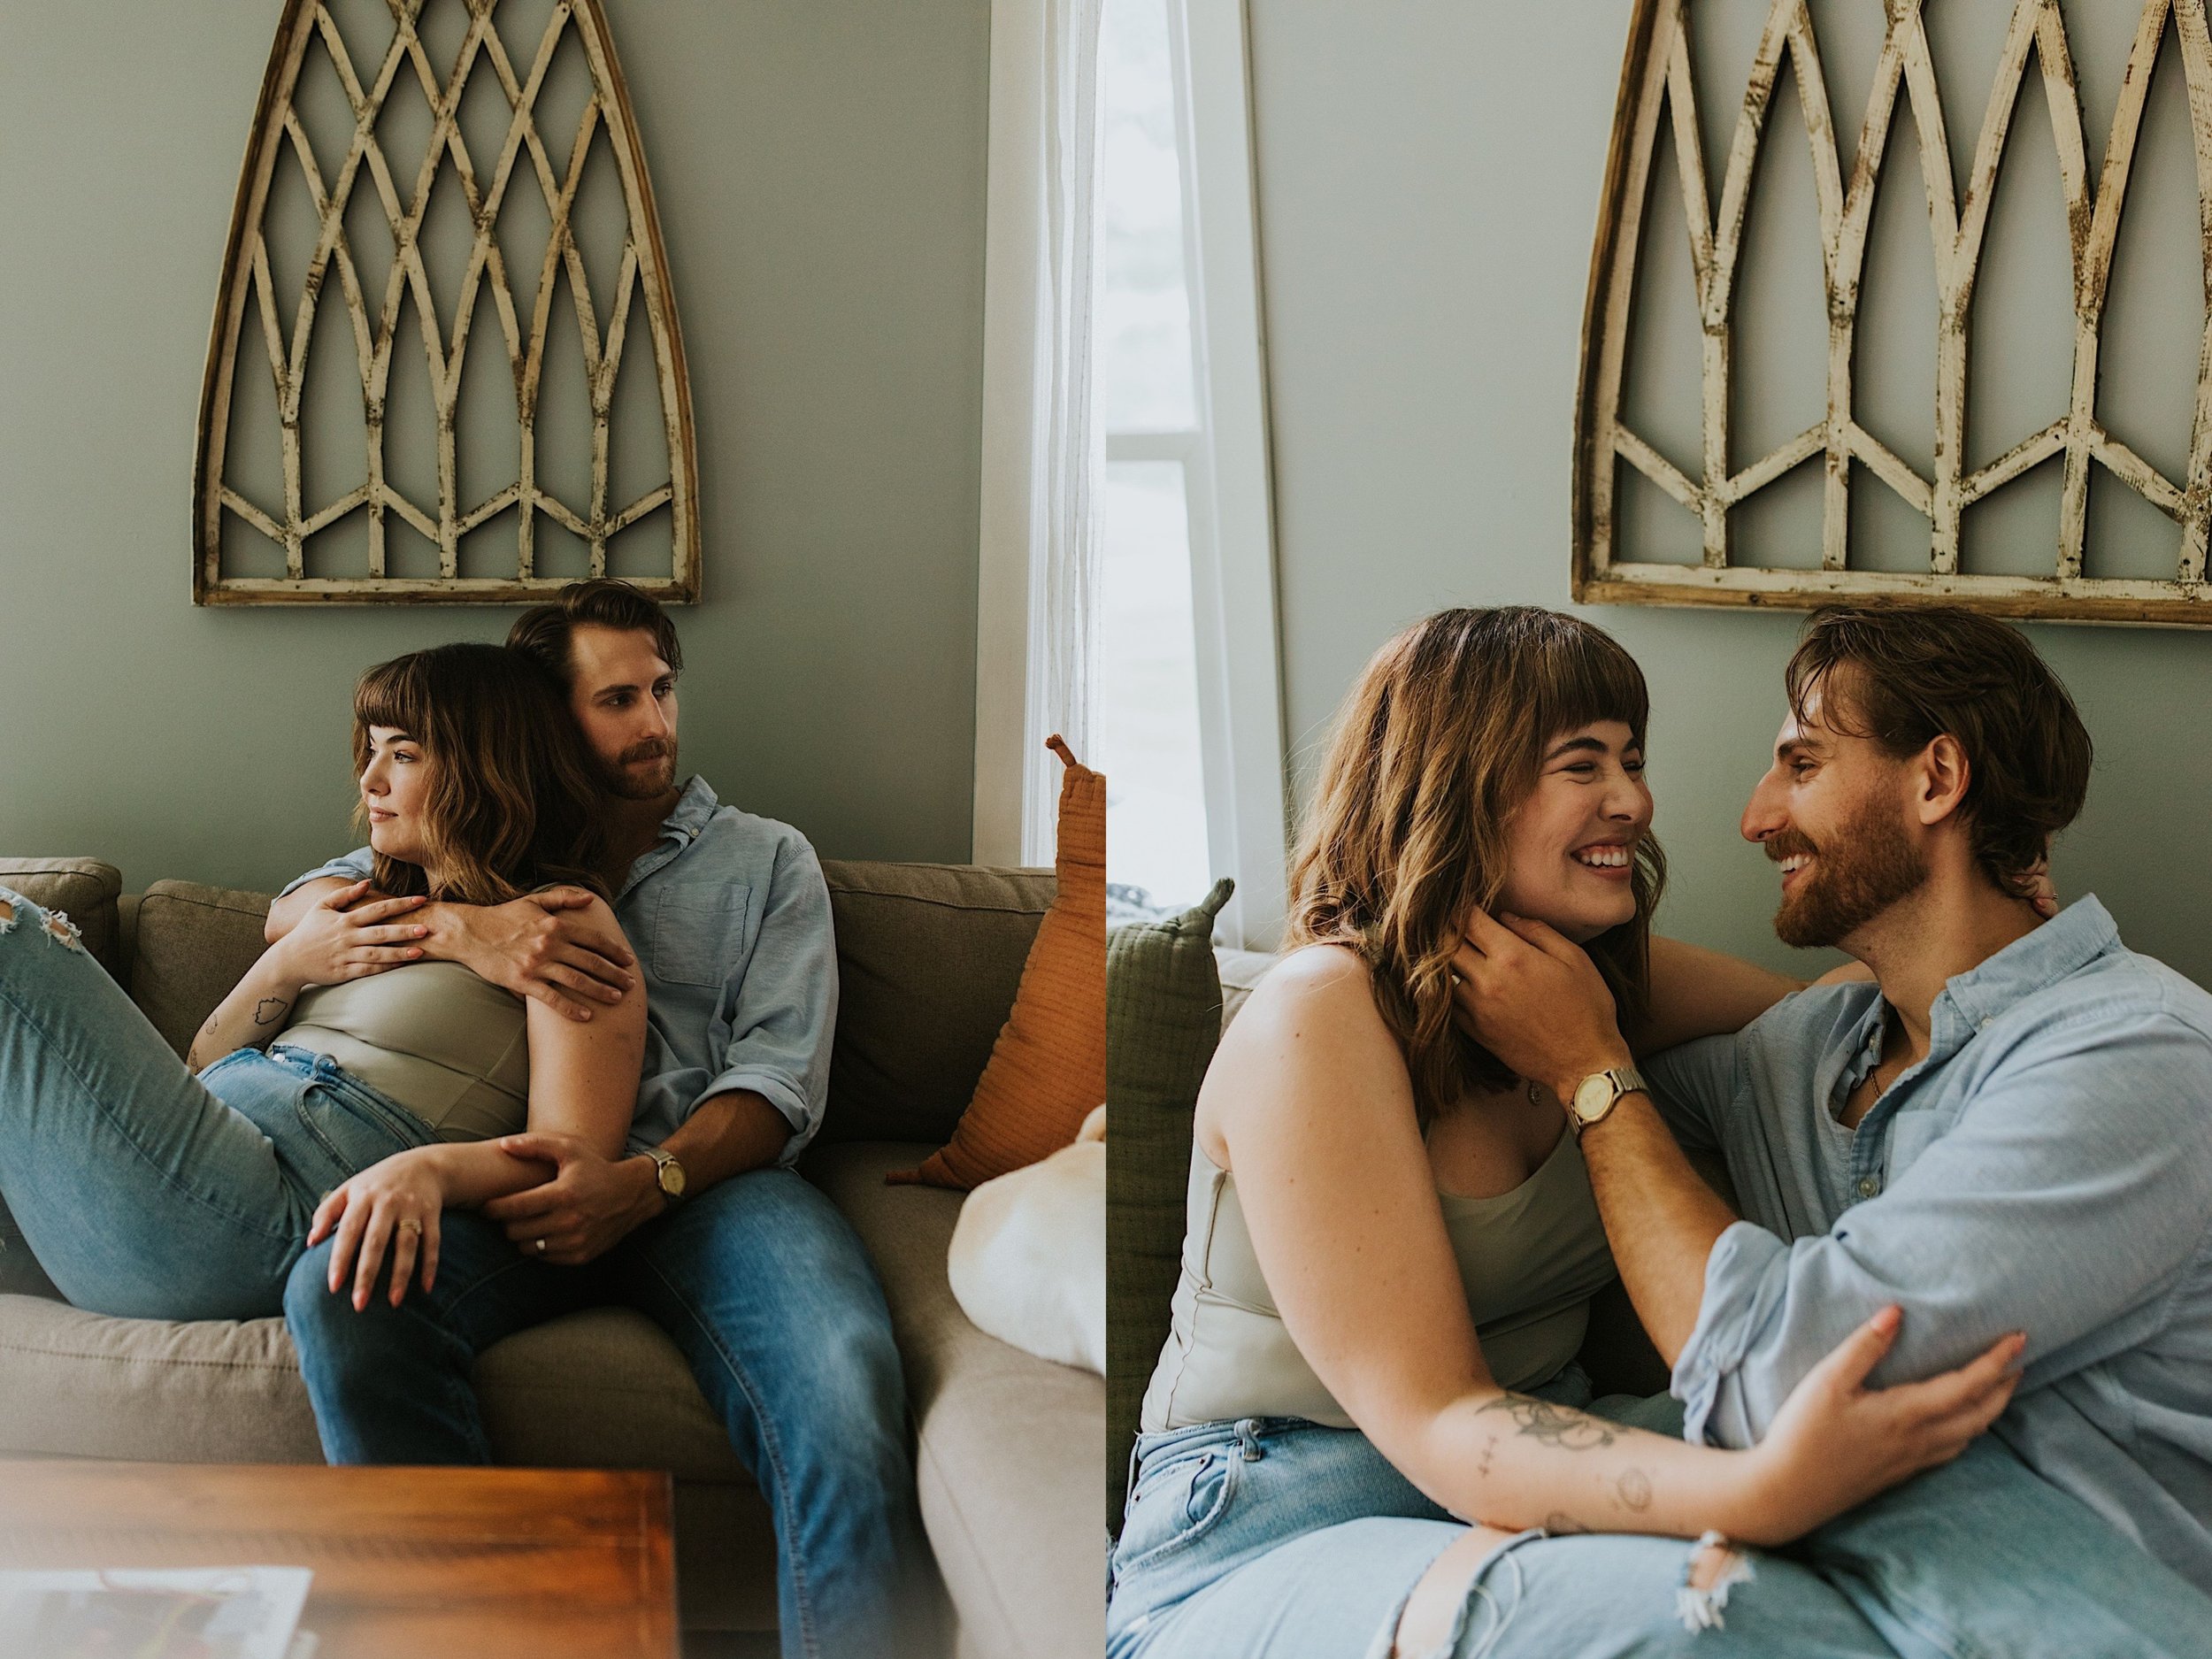 The left side image is of a married couple sitting on the couch together looking in opposite directions.  The right side image is of a married couple sitting on the couch in their home laughing together and looking at one another.